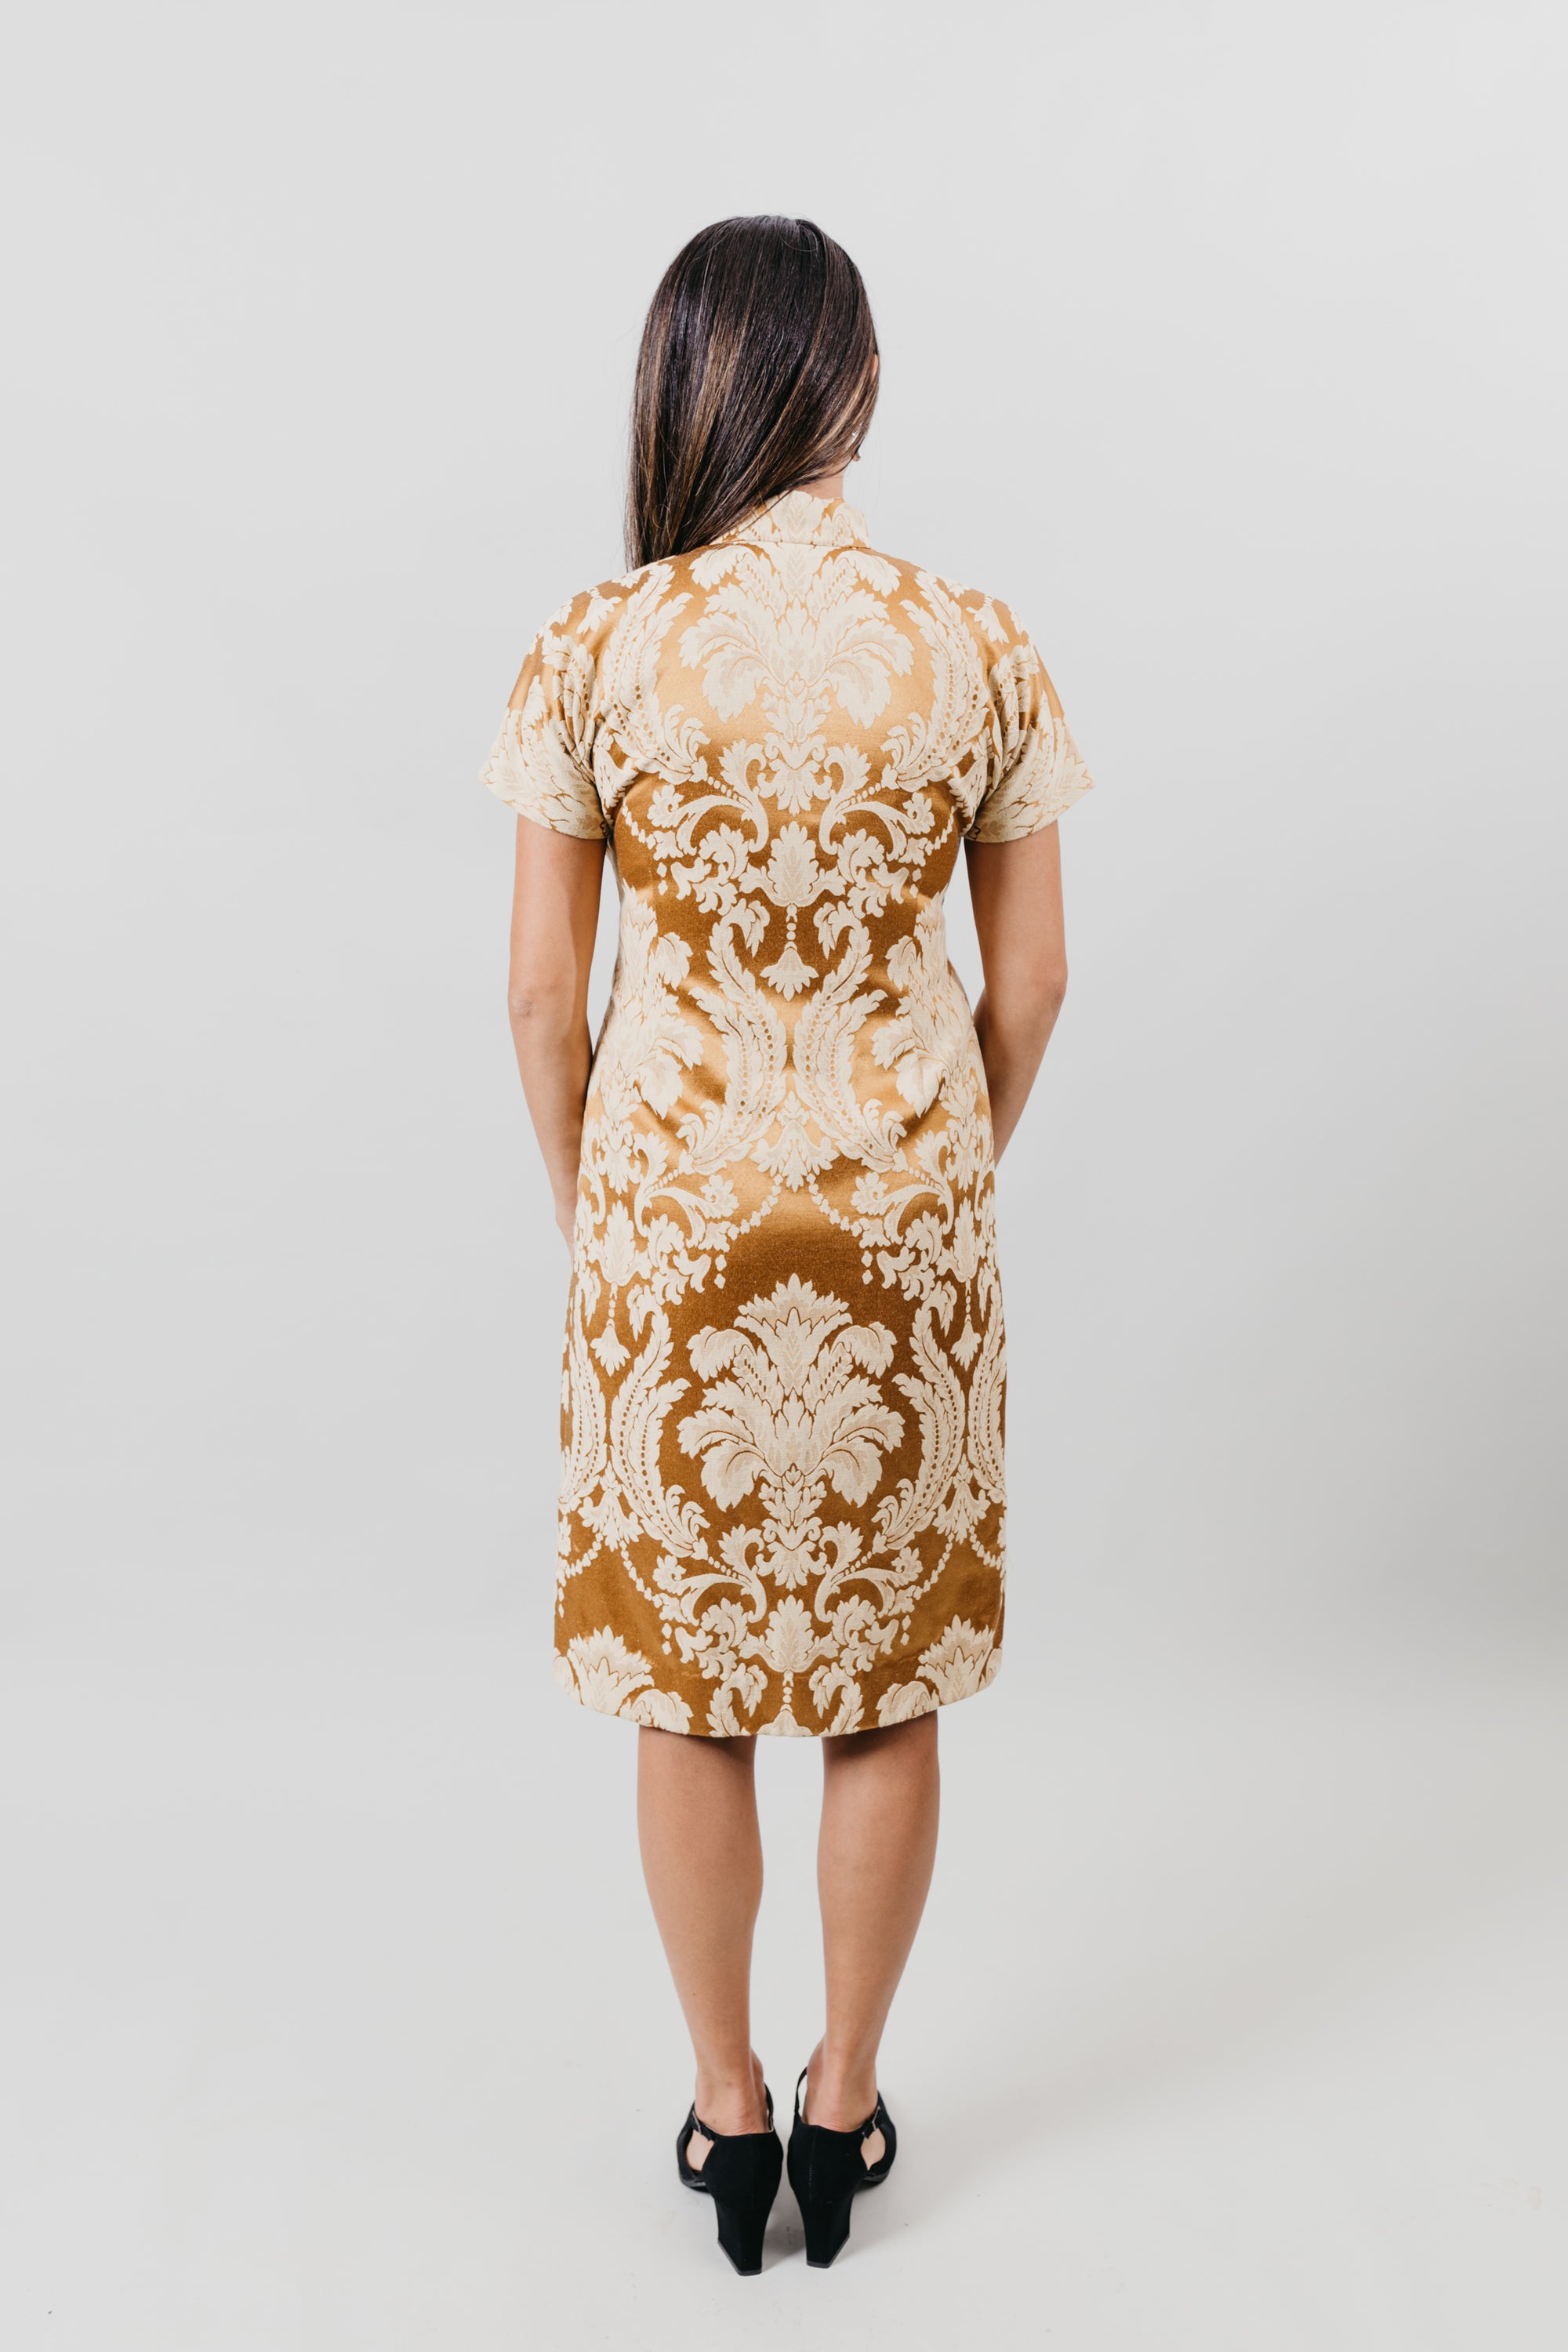 Back view of woman wearing knee-length gold brocade cheongsam in front of white backdrop